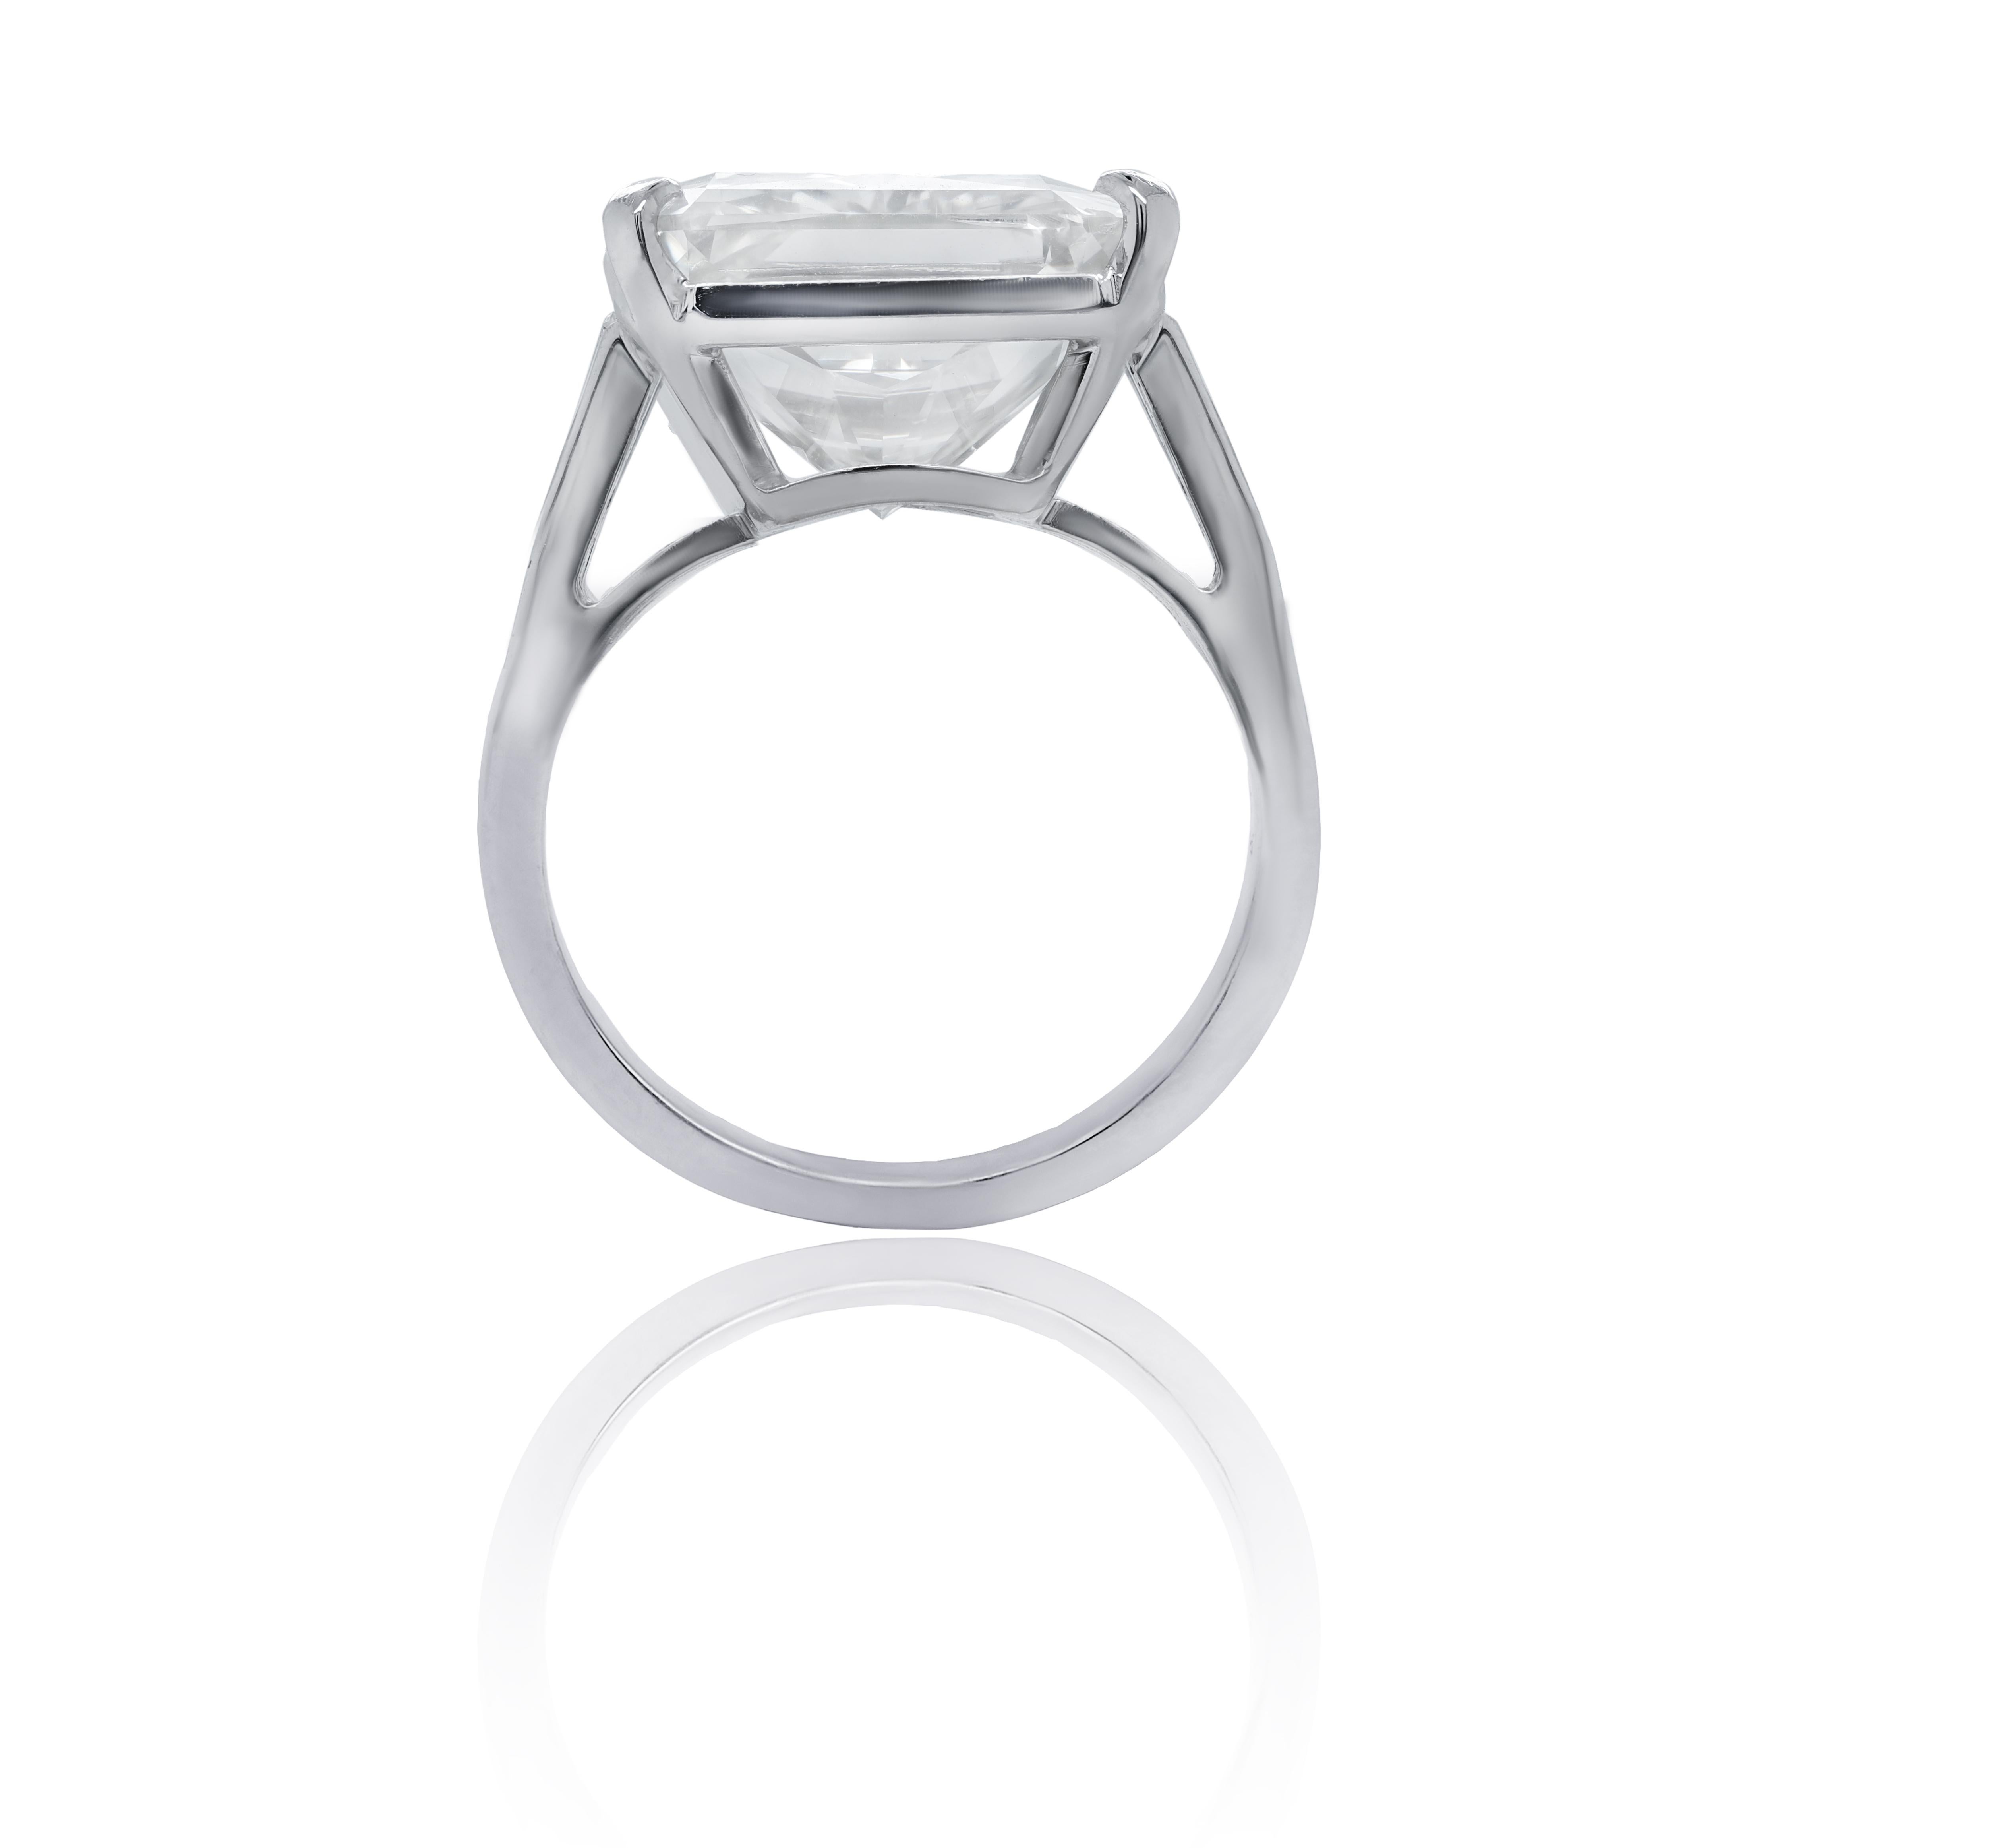 Platin Fashion Ring strahlend 9,91cts k si2 GIA#2205227262, Fassung 0,30cts Diamanten
